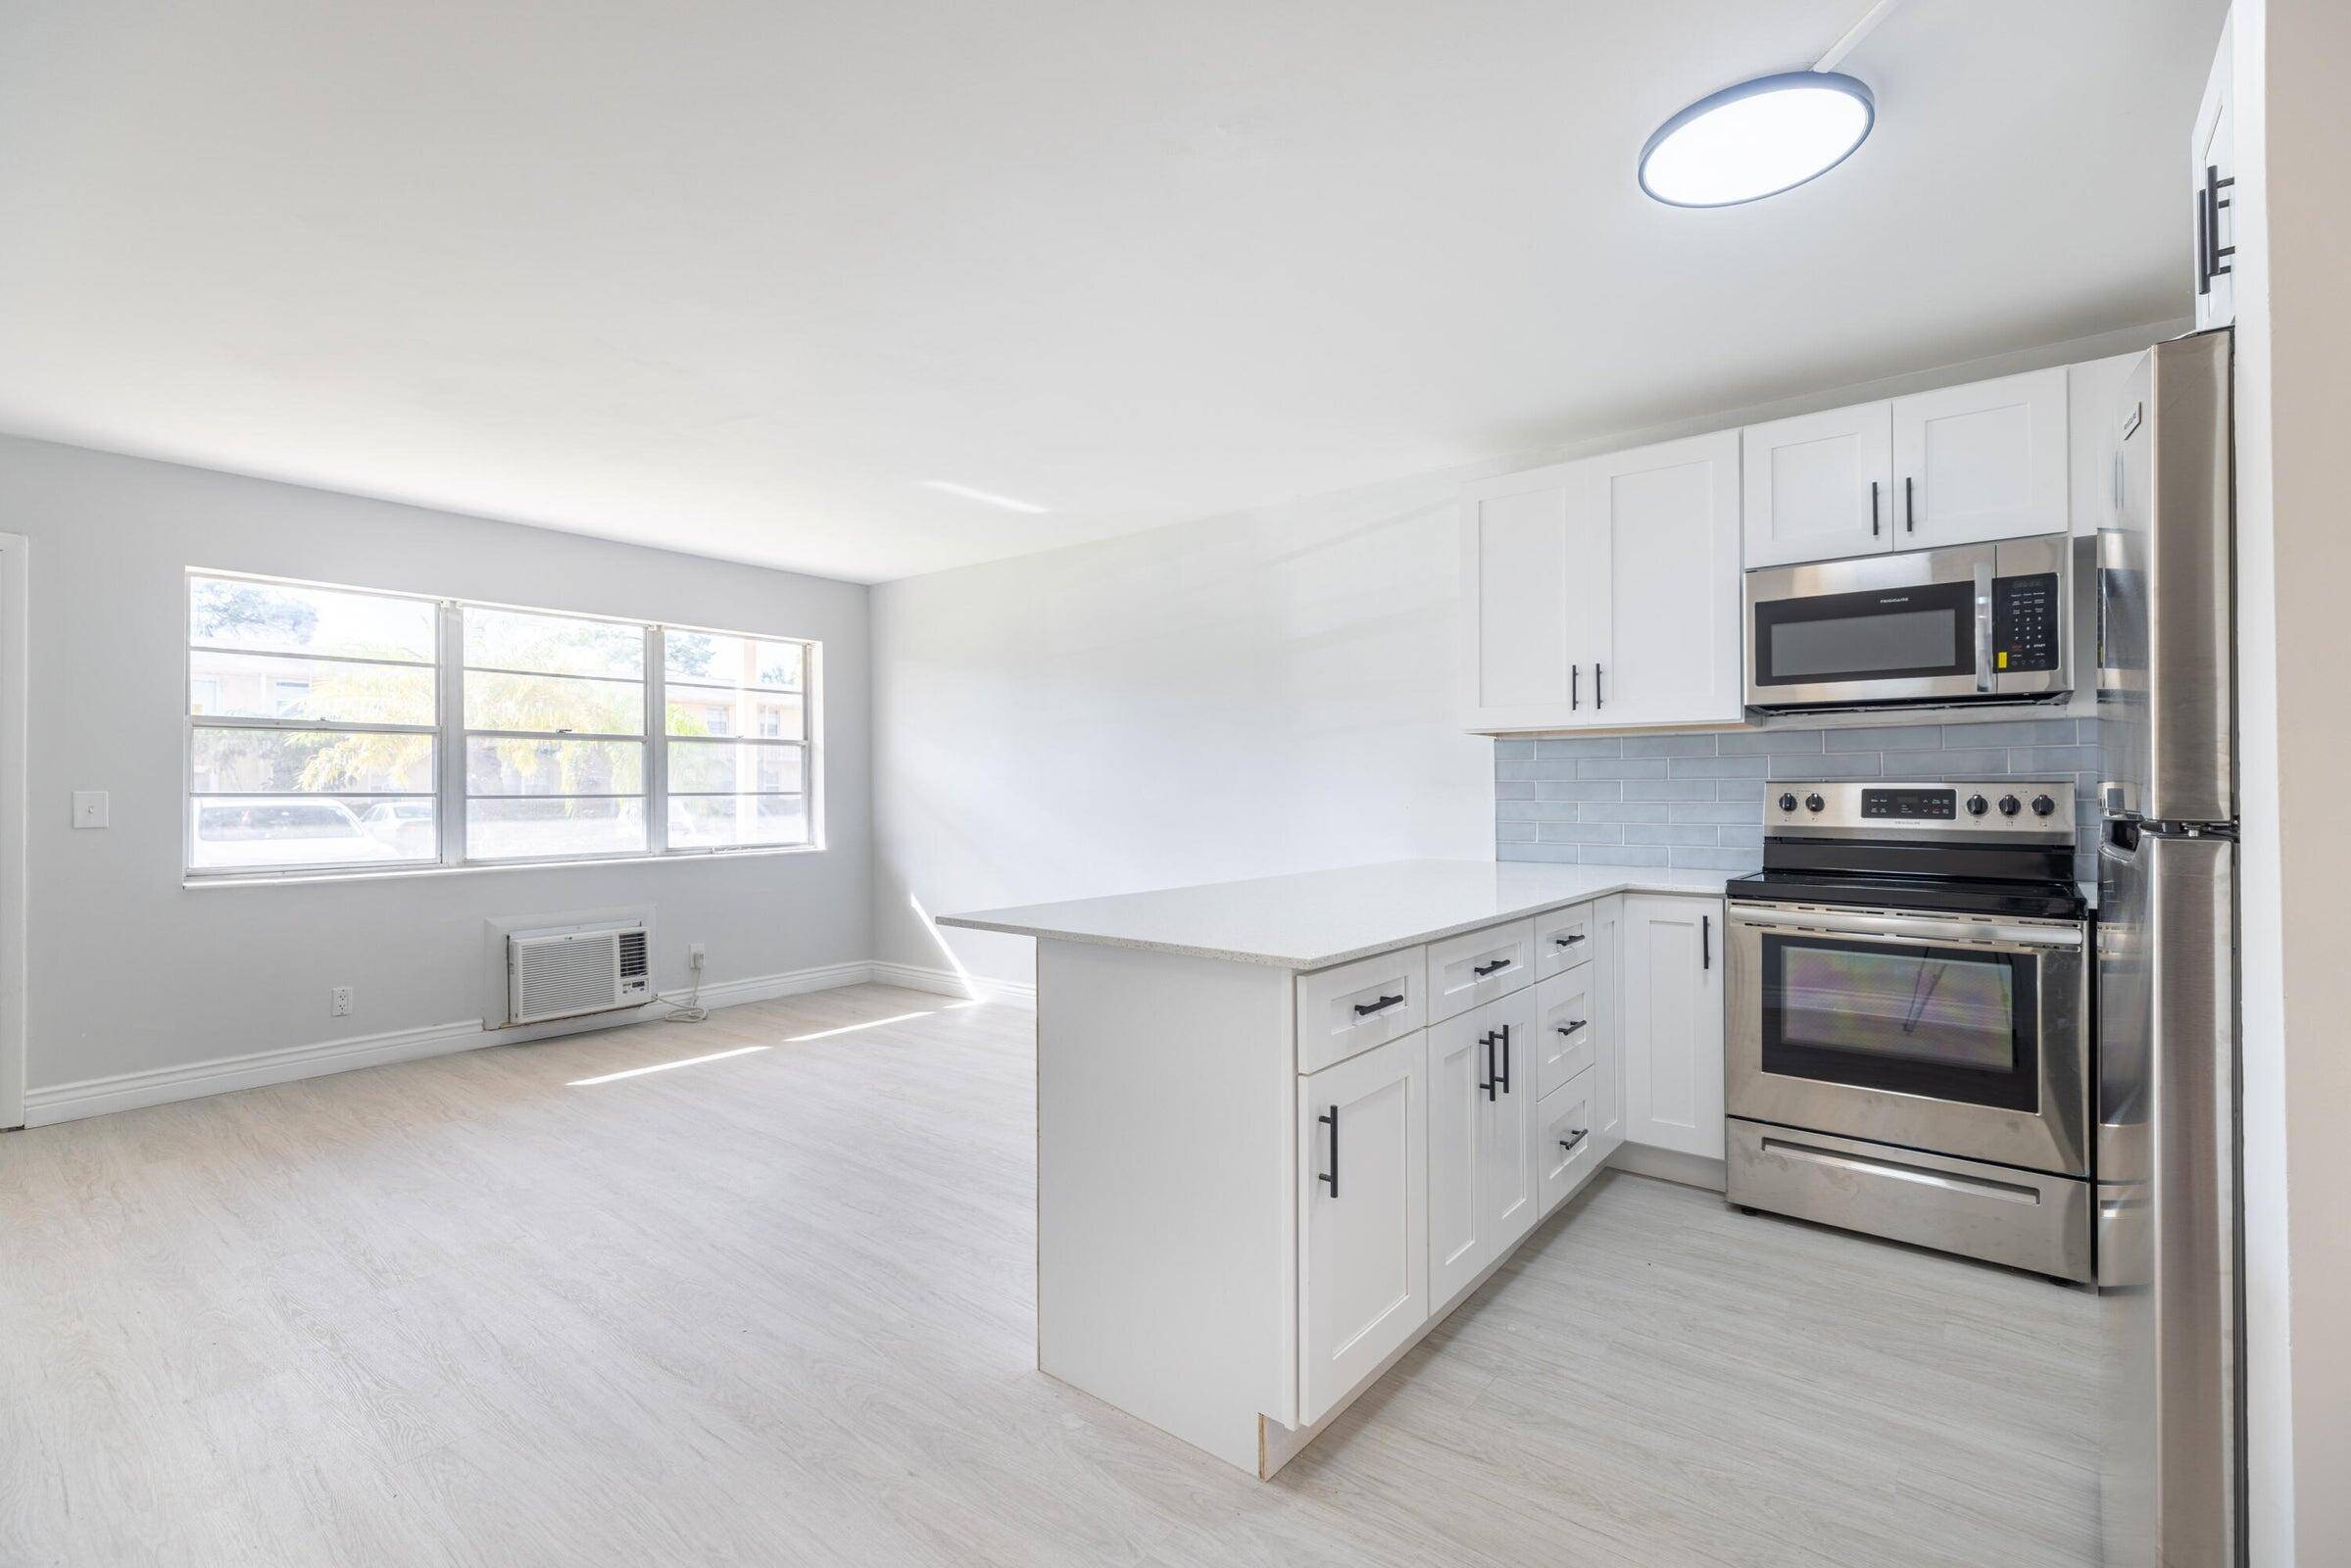 This immaculate 1st floor, 1 bedroom, 1 bathroom unit has undergone a complete renovation, offering you a stylish and comfortable living space that's ready for you to move in and ...